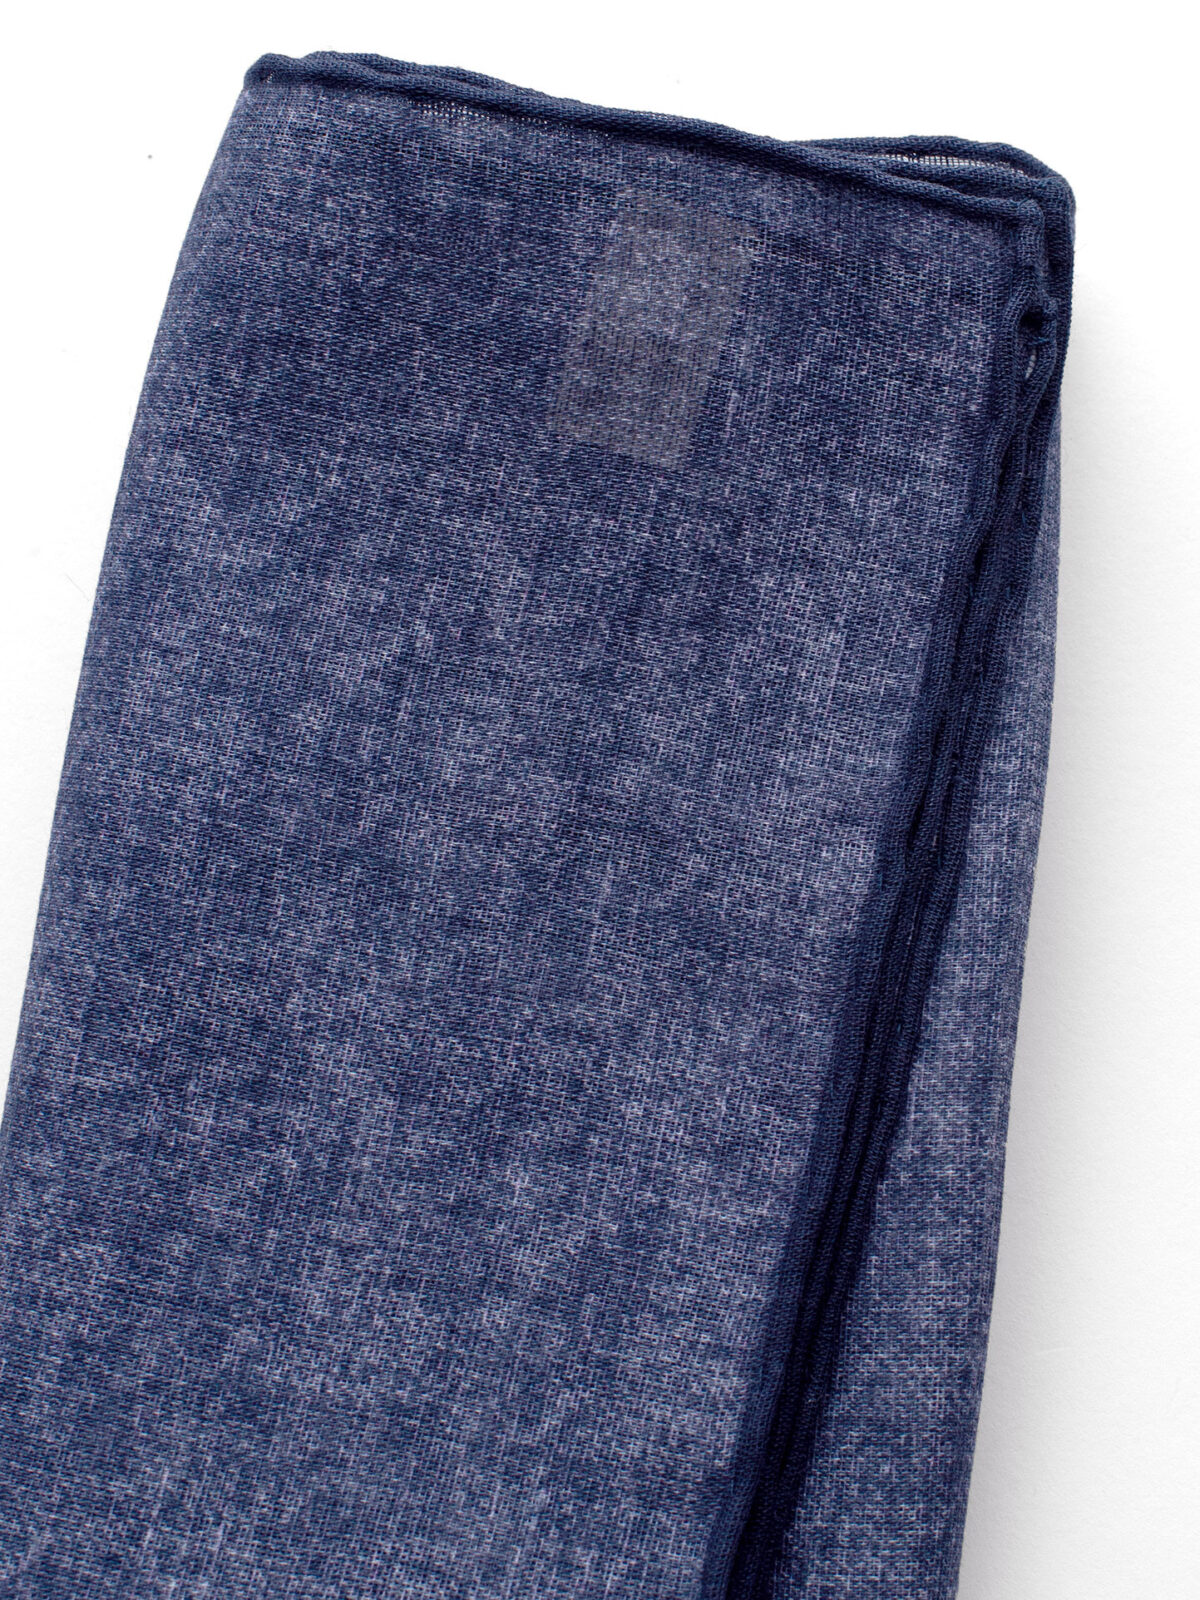 Navy Tipped Tonal Cotton and Linen Pocket Square